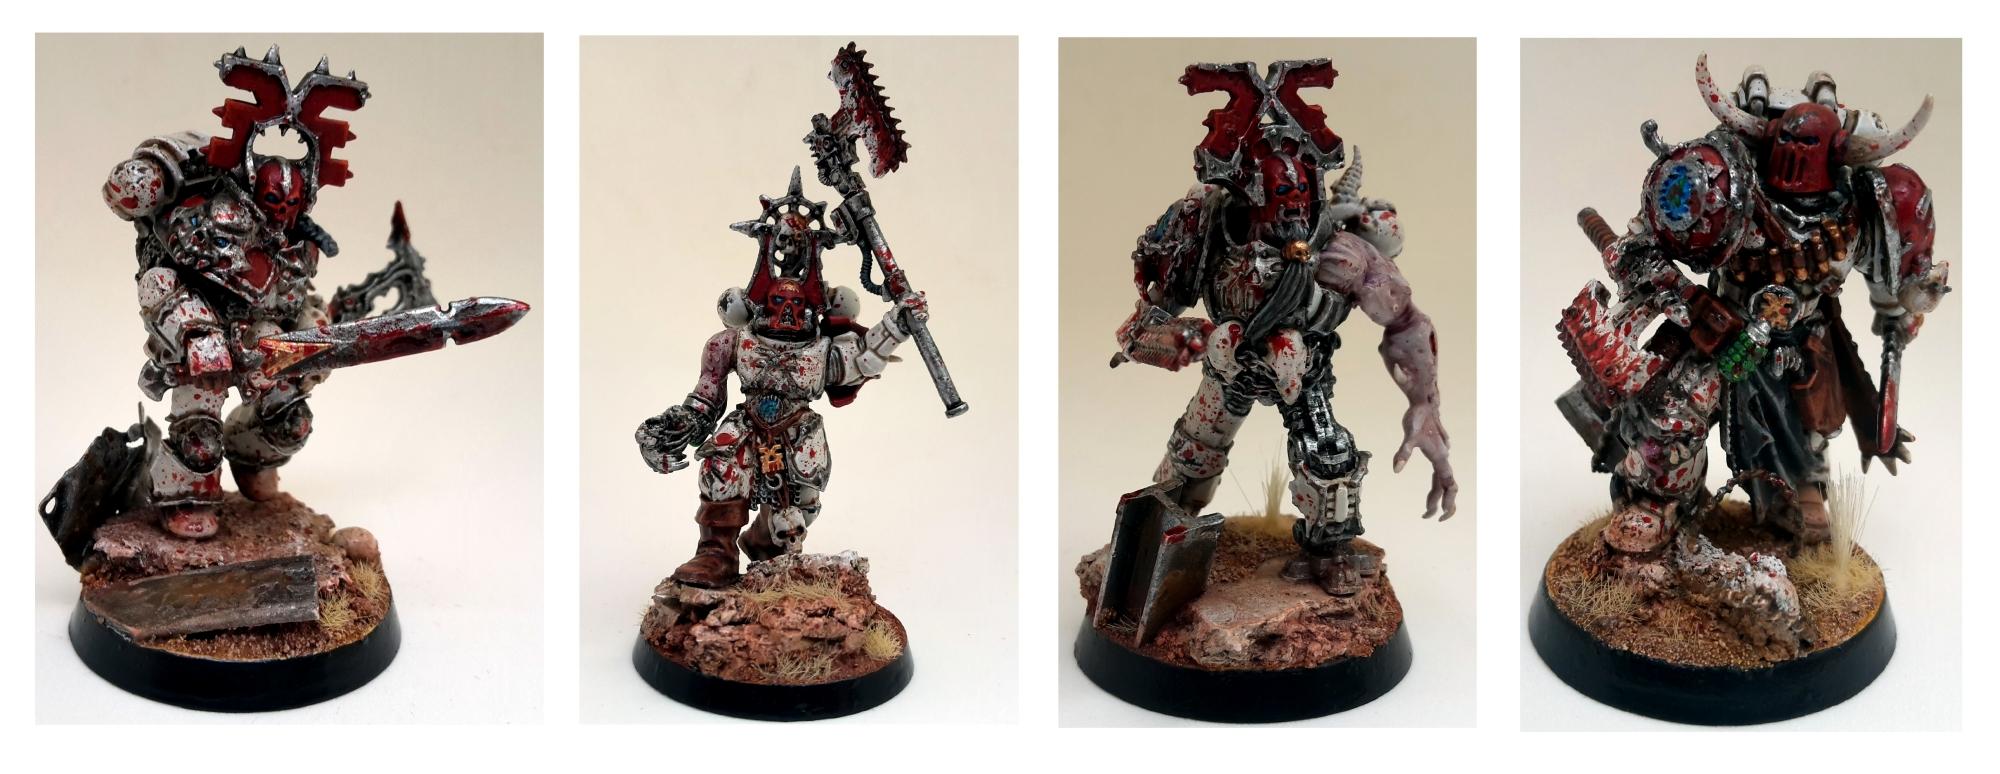 Berserkers, Chaos Space Marines, Conversion, World Eaters